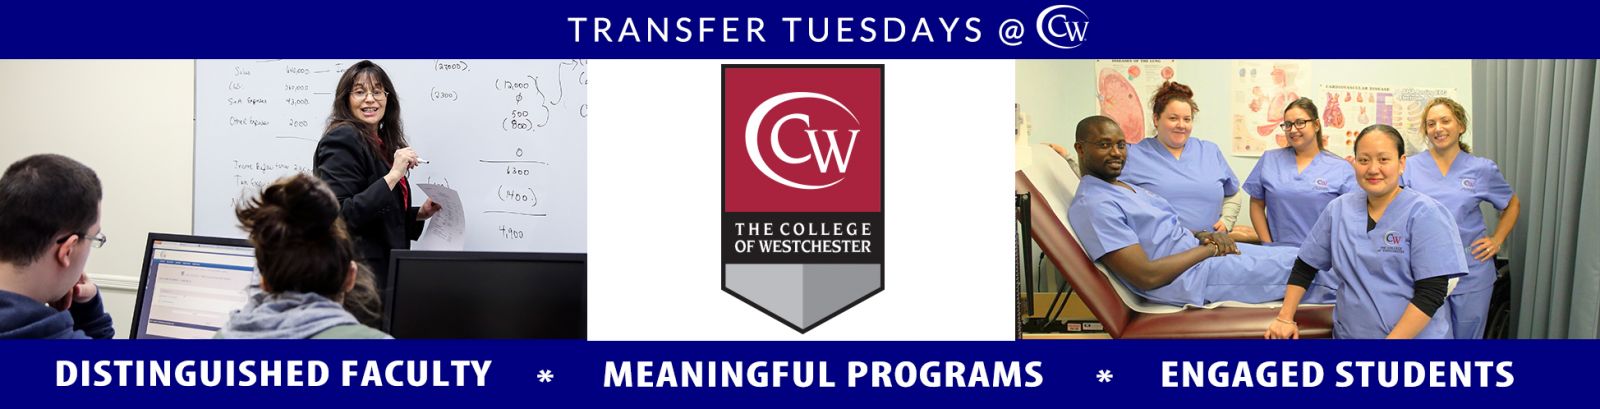 The College of Westchester Transfer Tuesdays